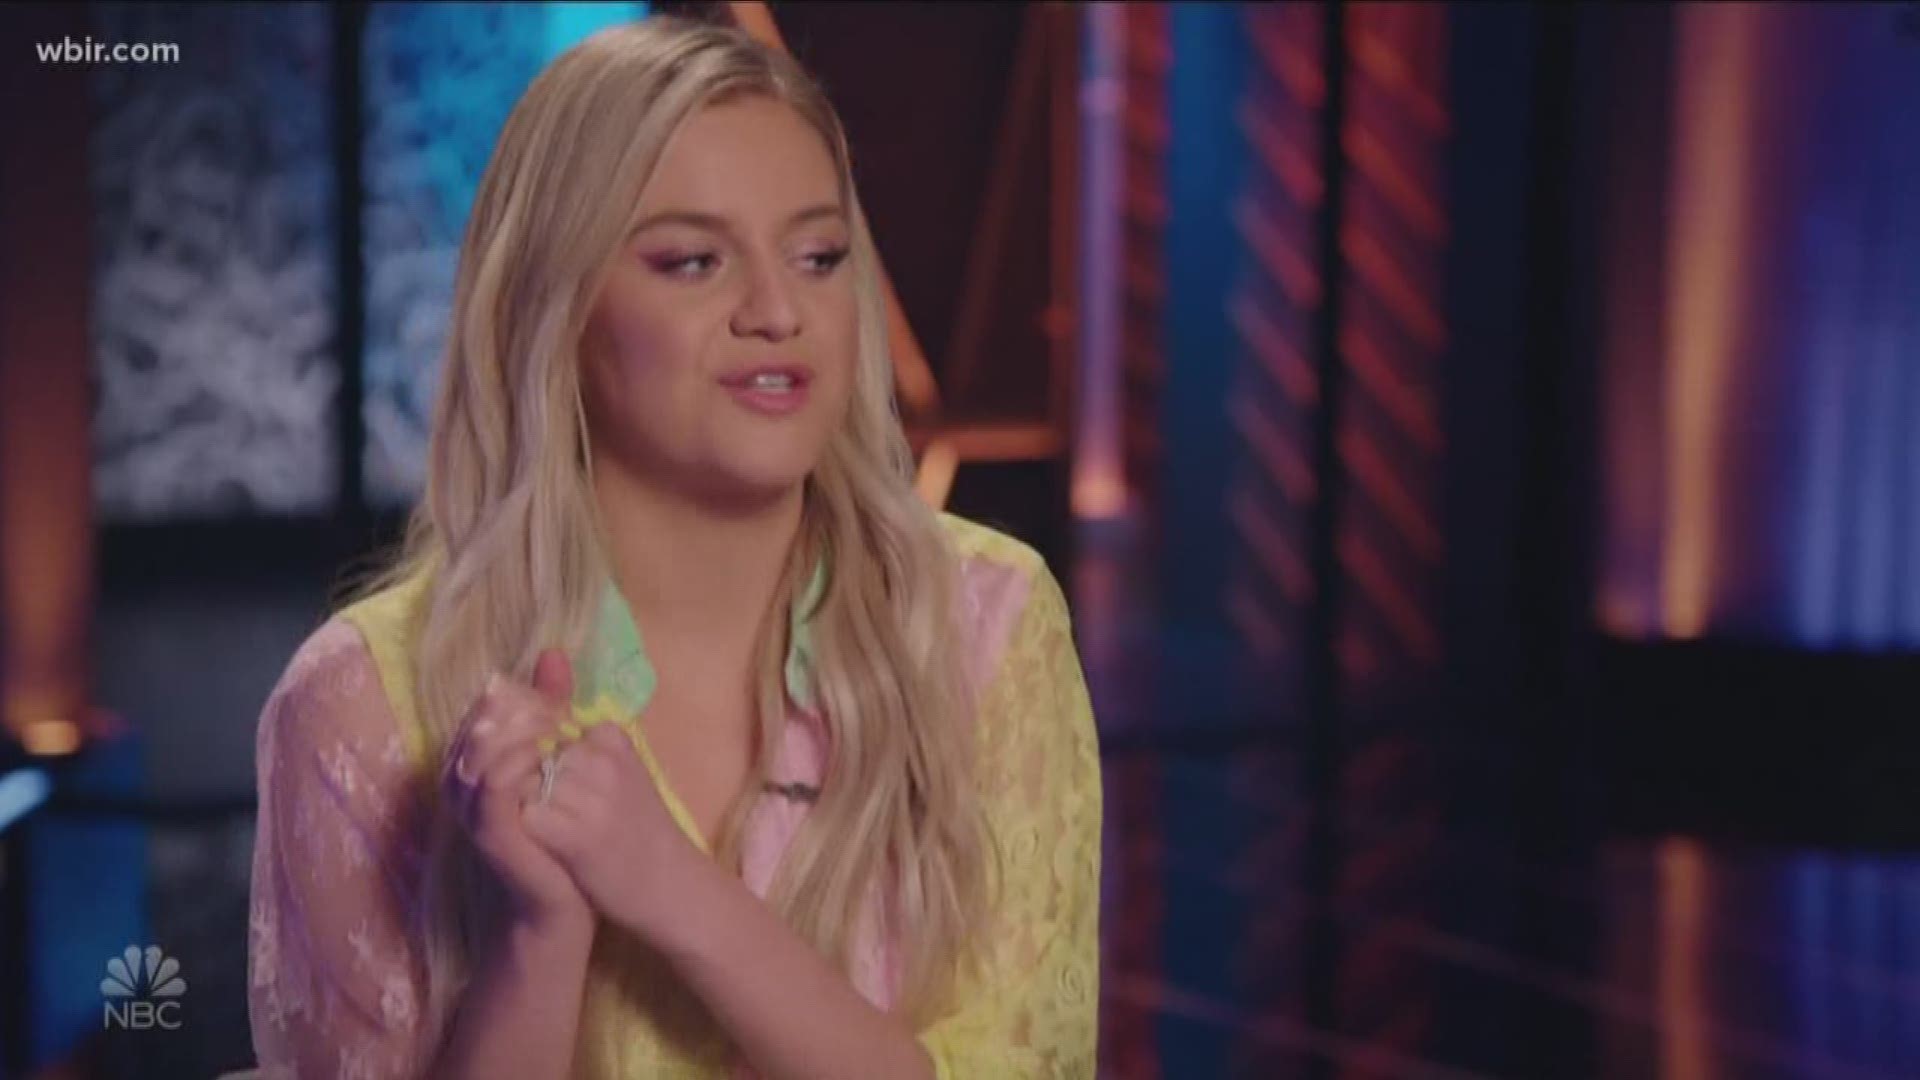 Kelsea Ballerini went on the hunt for her next great song tonight on the show Songland.